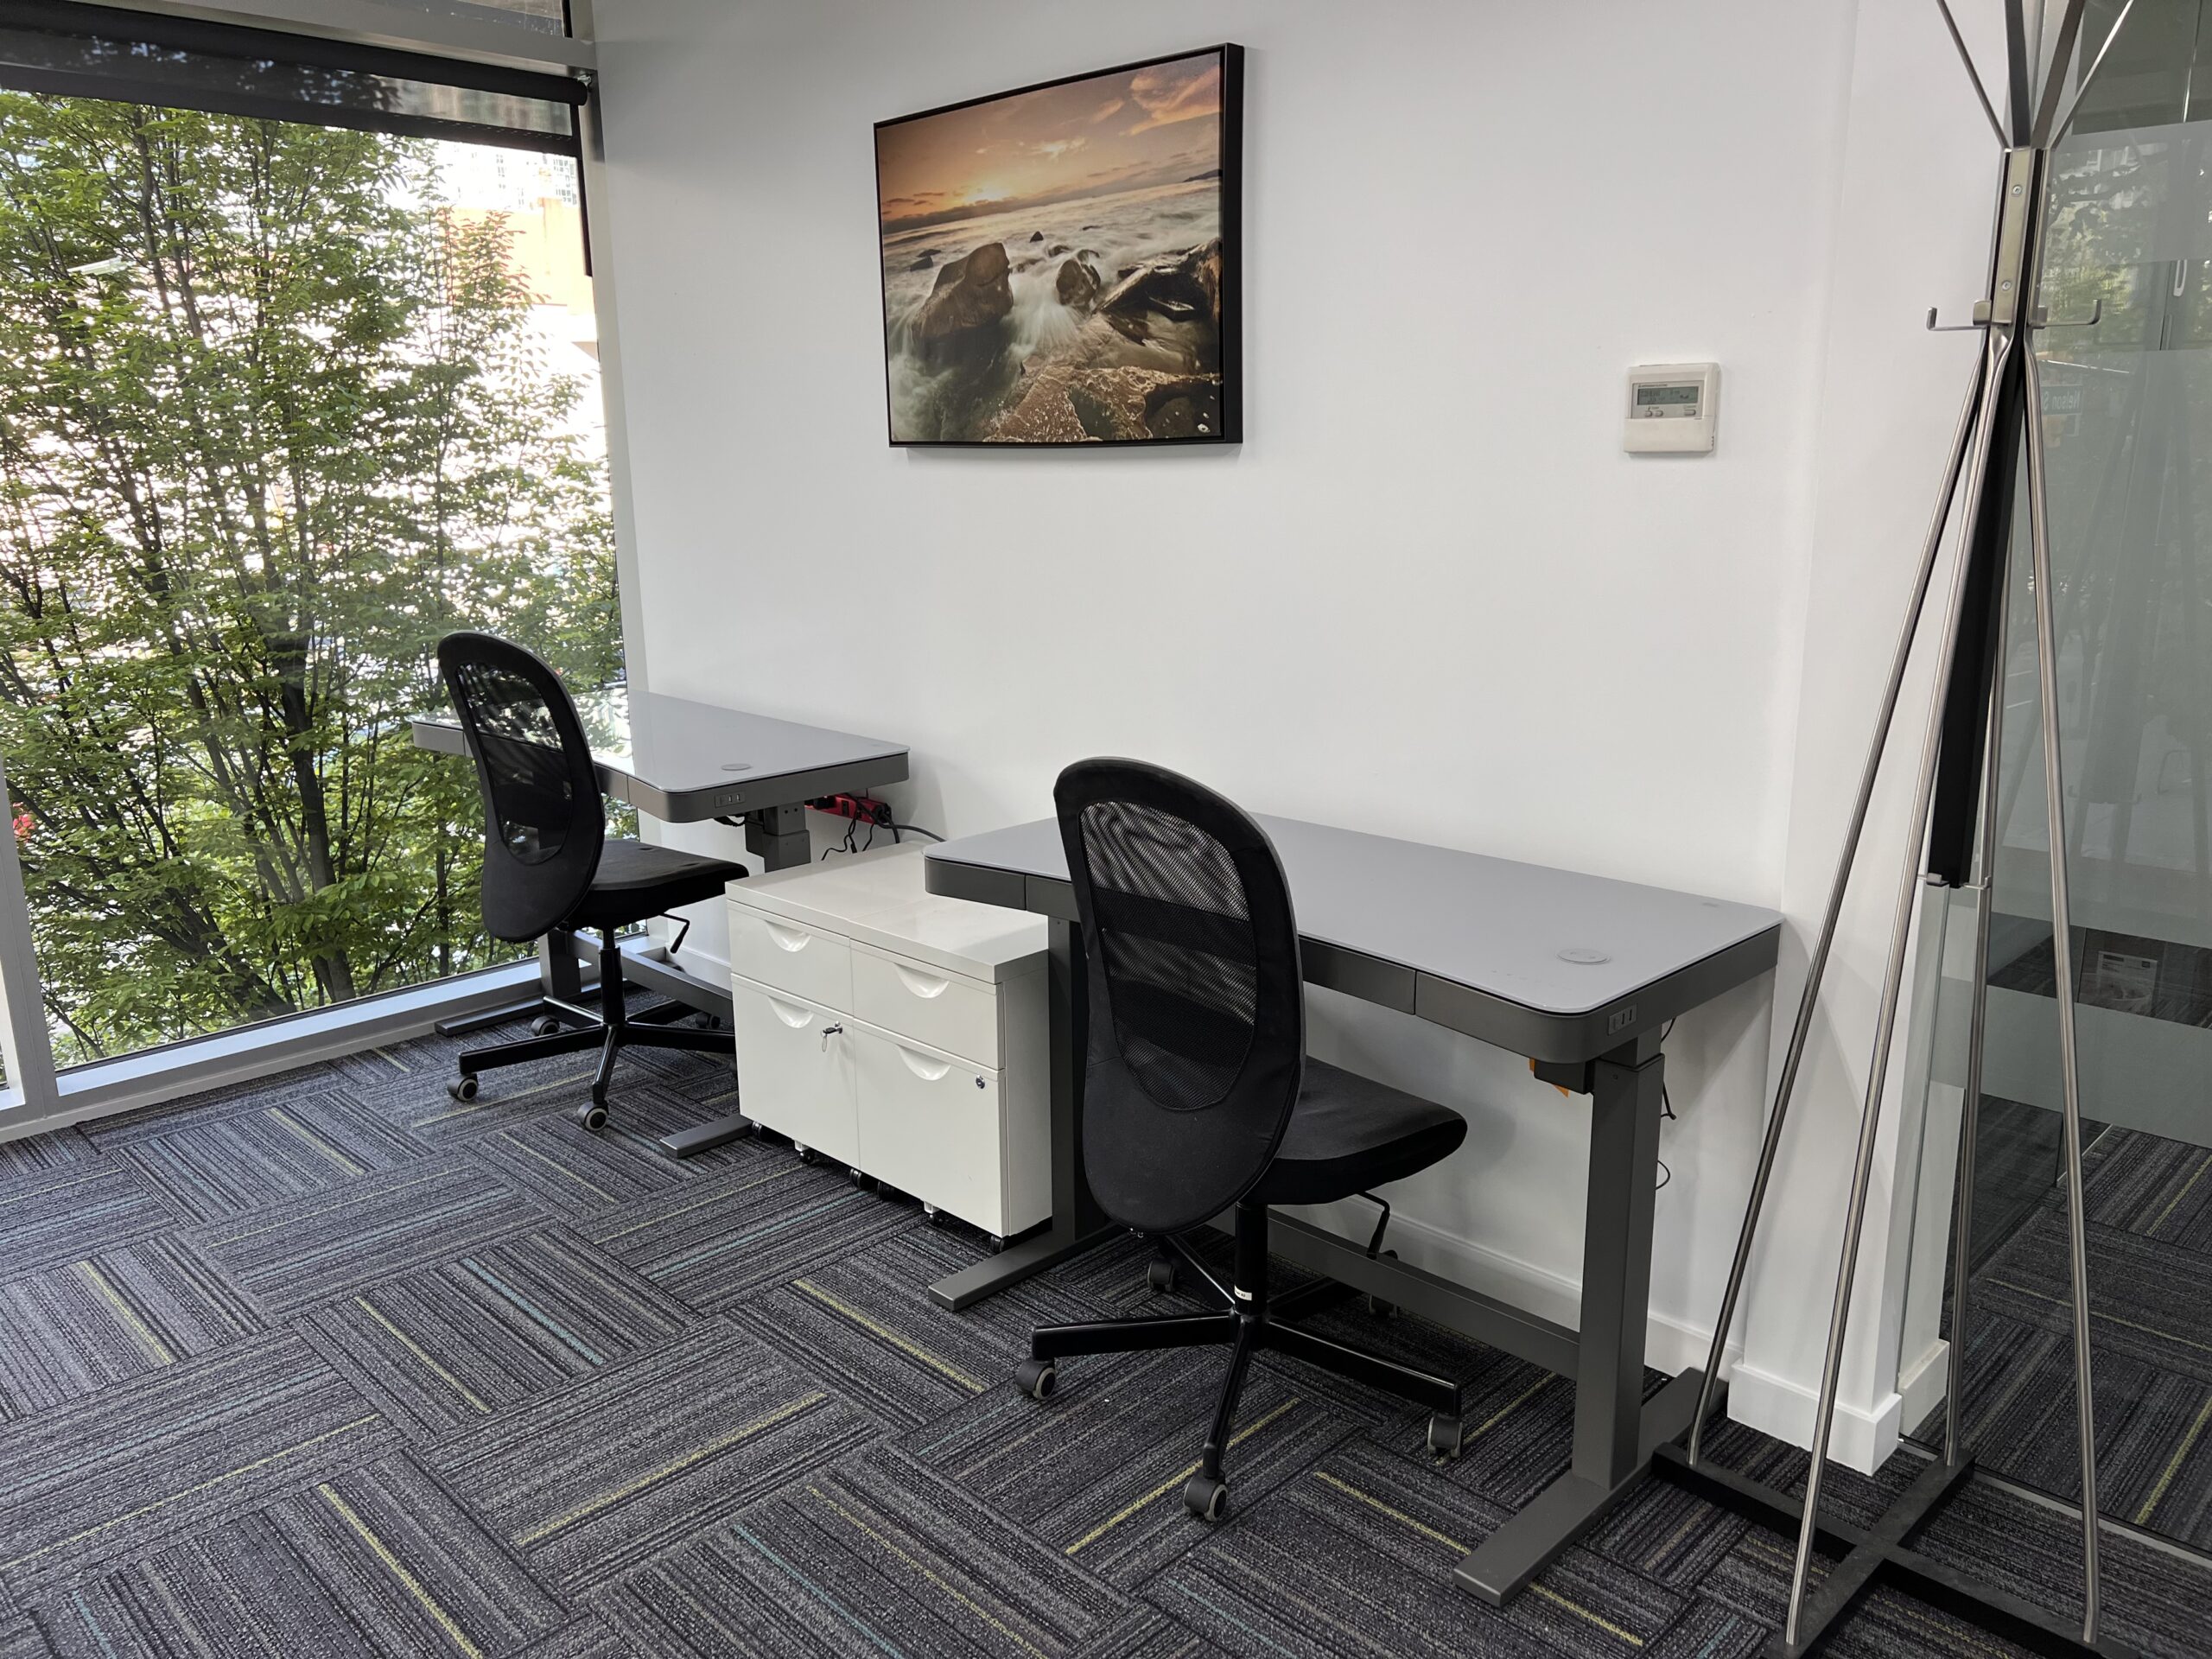 Comfortable & well-equipped meeting room